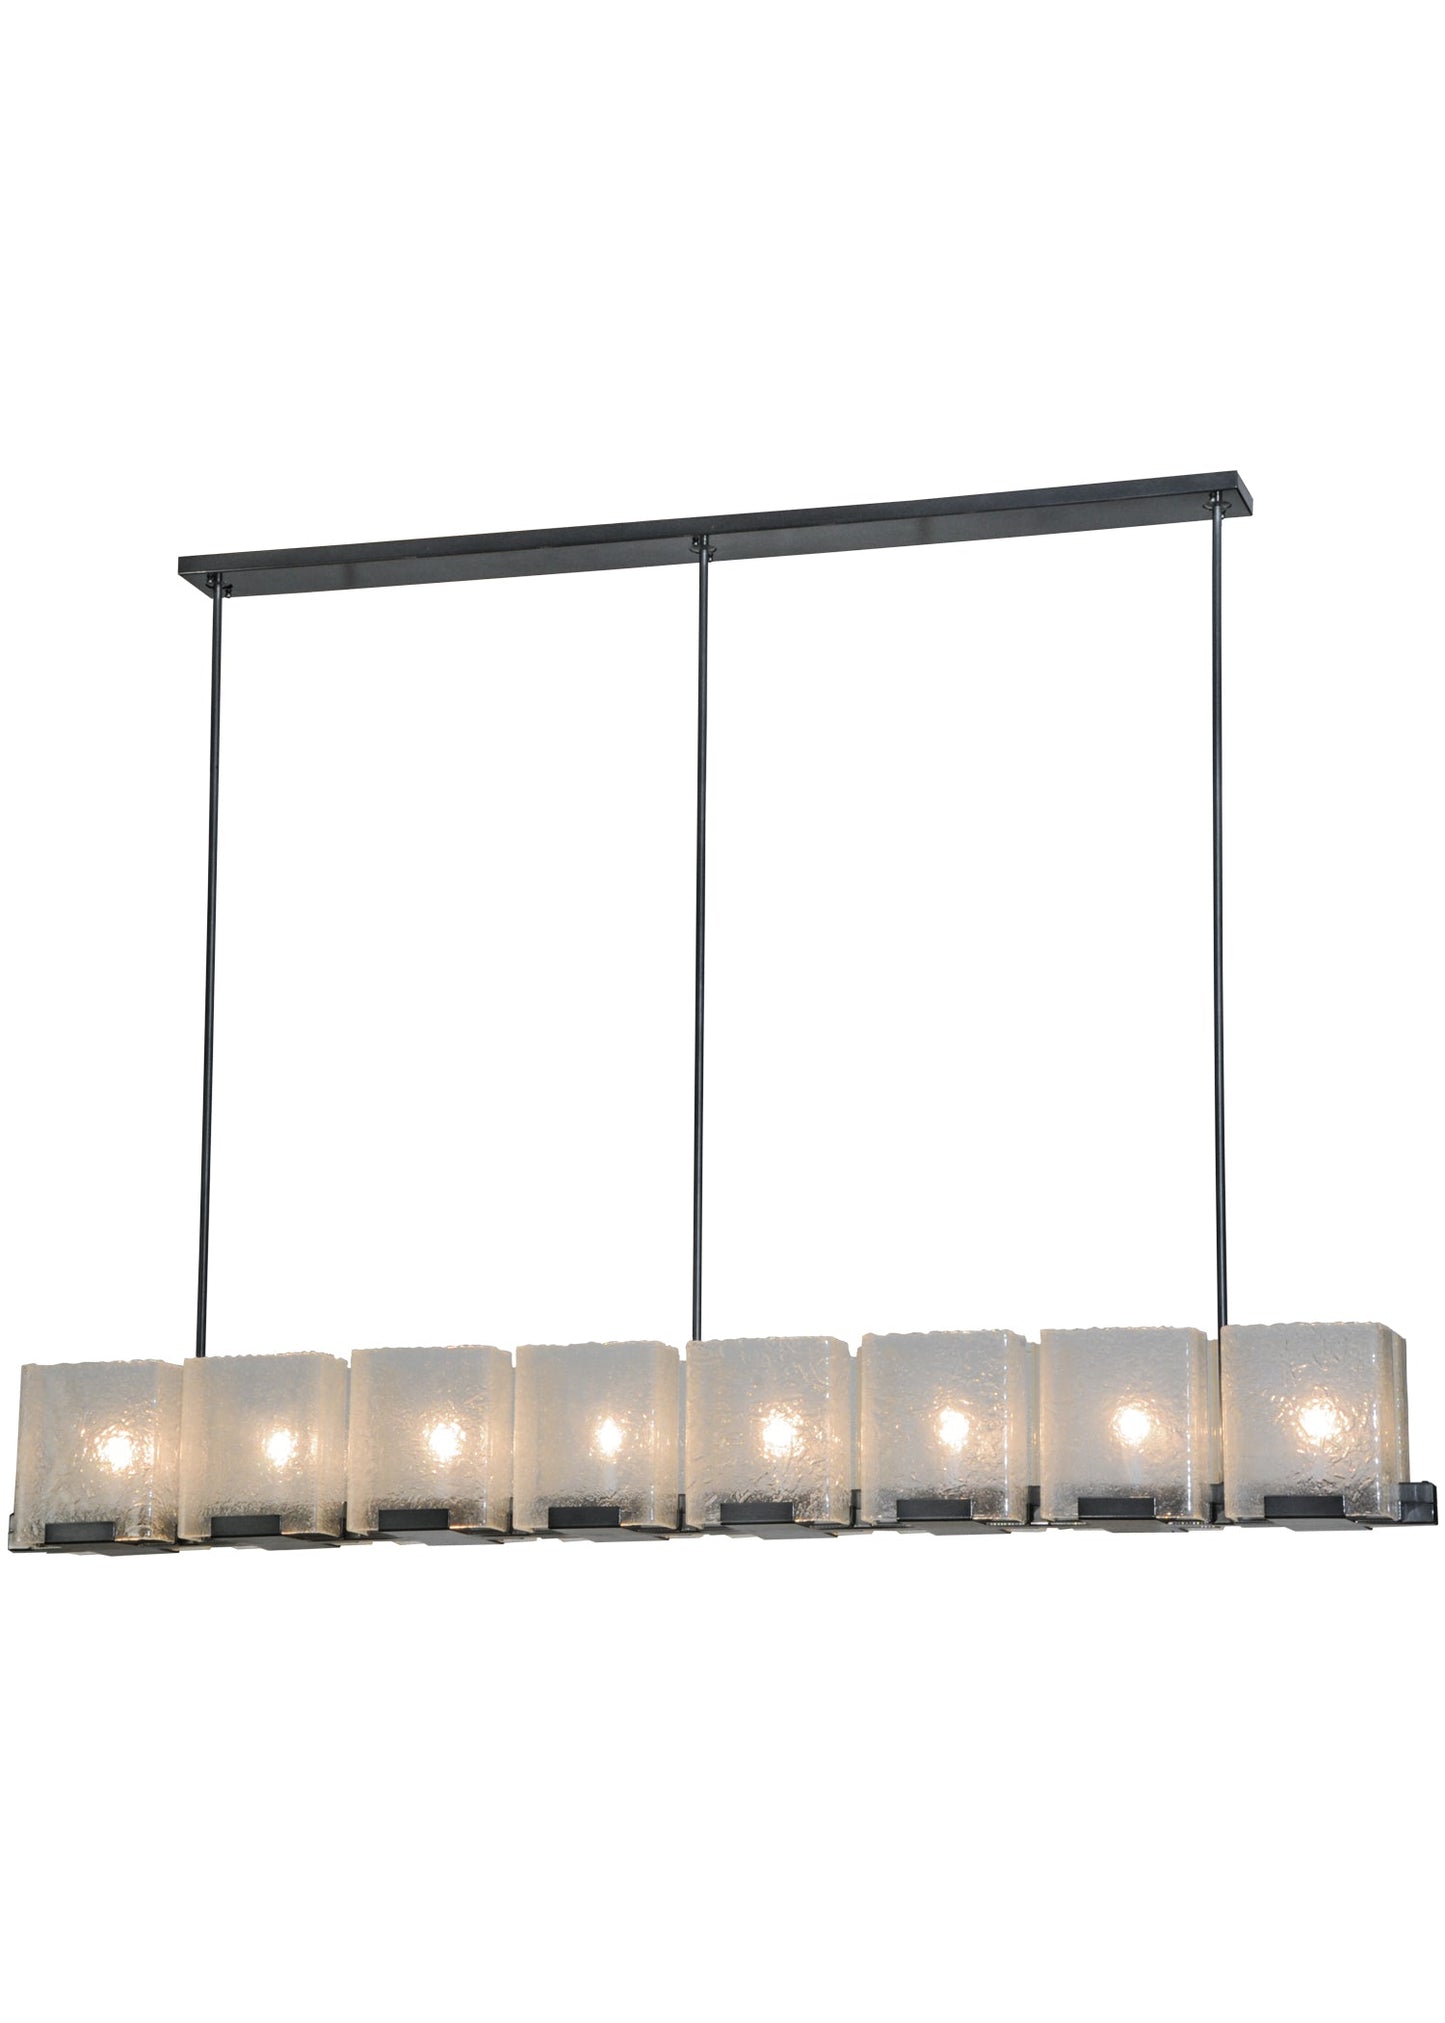 78" Ice Cube 8-Light Oblong Chandelier by 2nd Ave Lighting